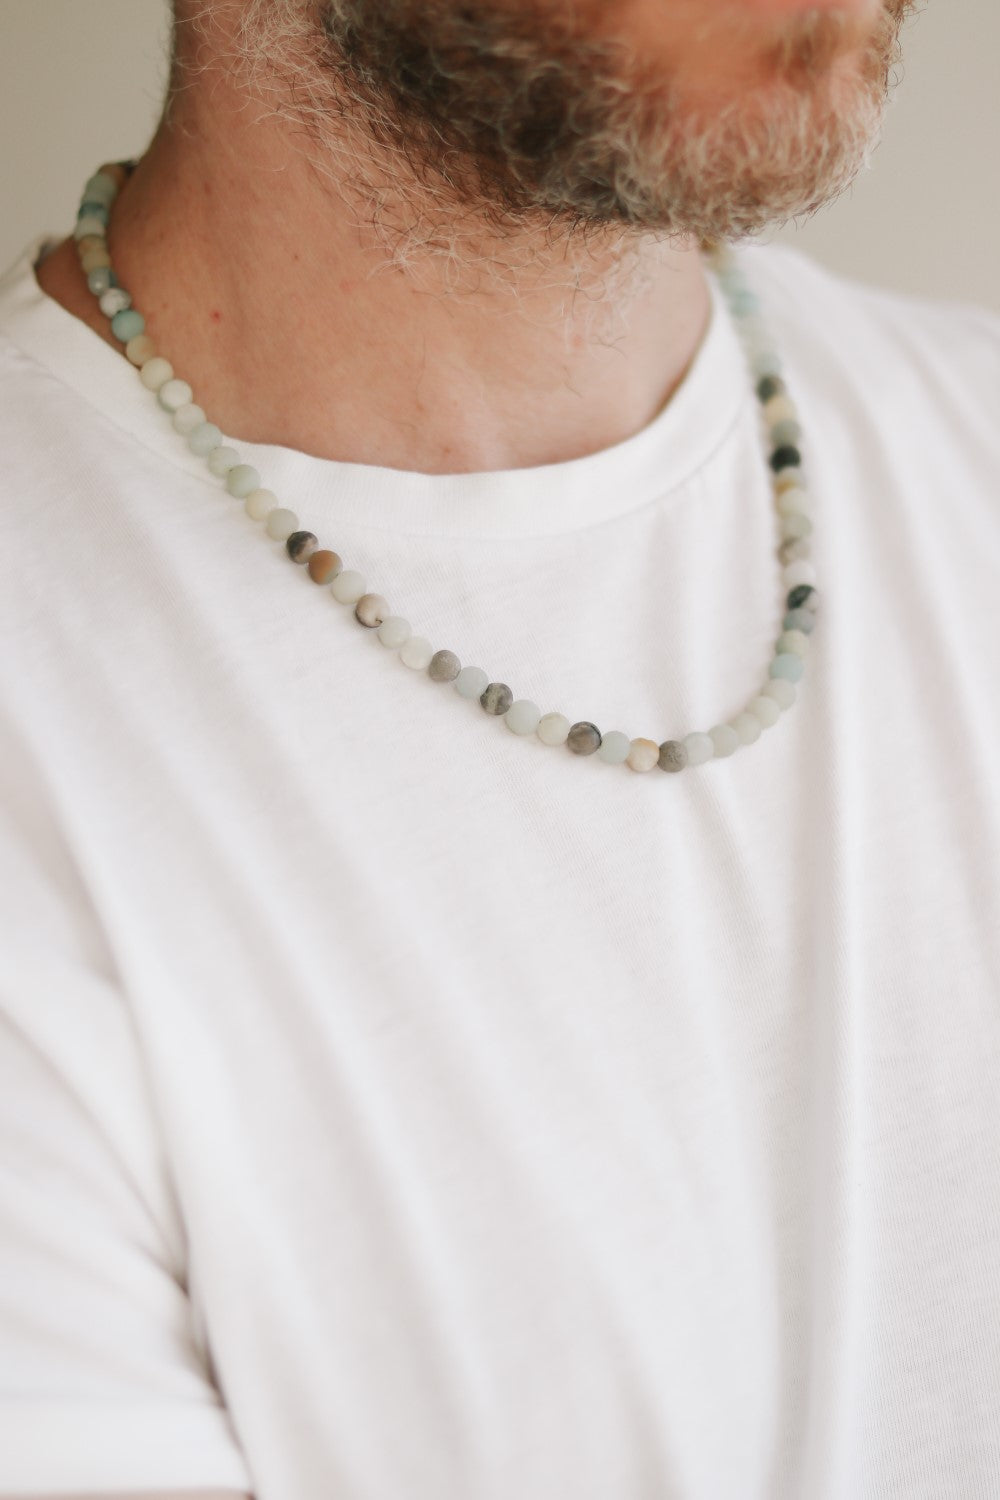 Amazon.com: Mens Beaded Necklace Natural Stone Hematite and Tigers Eye  Jewelry Gift Idea for Him : Handmade Products